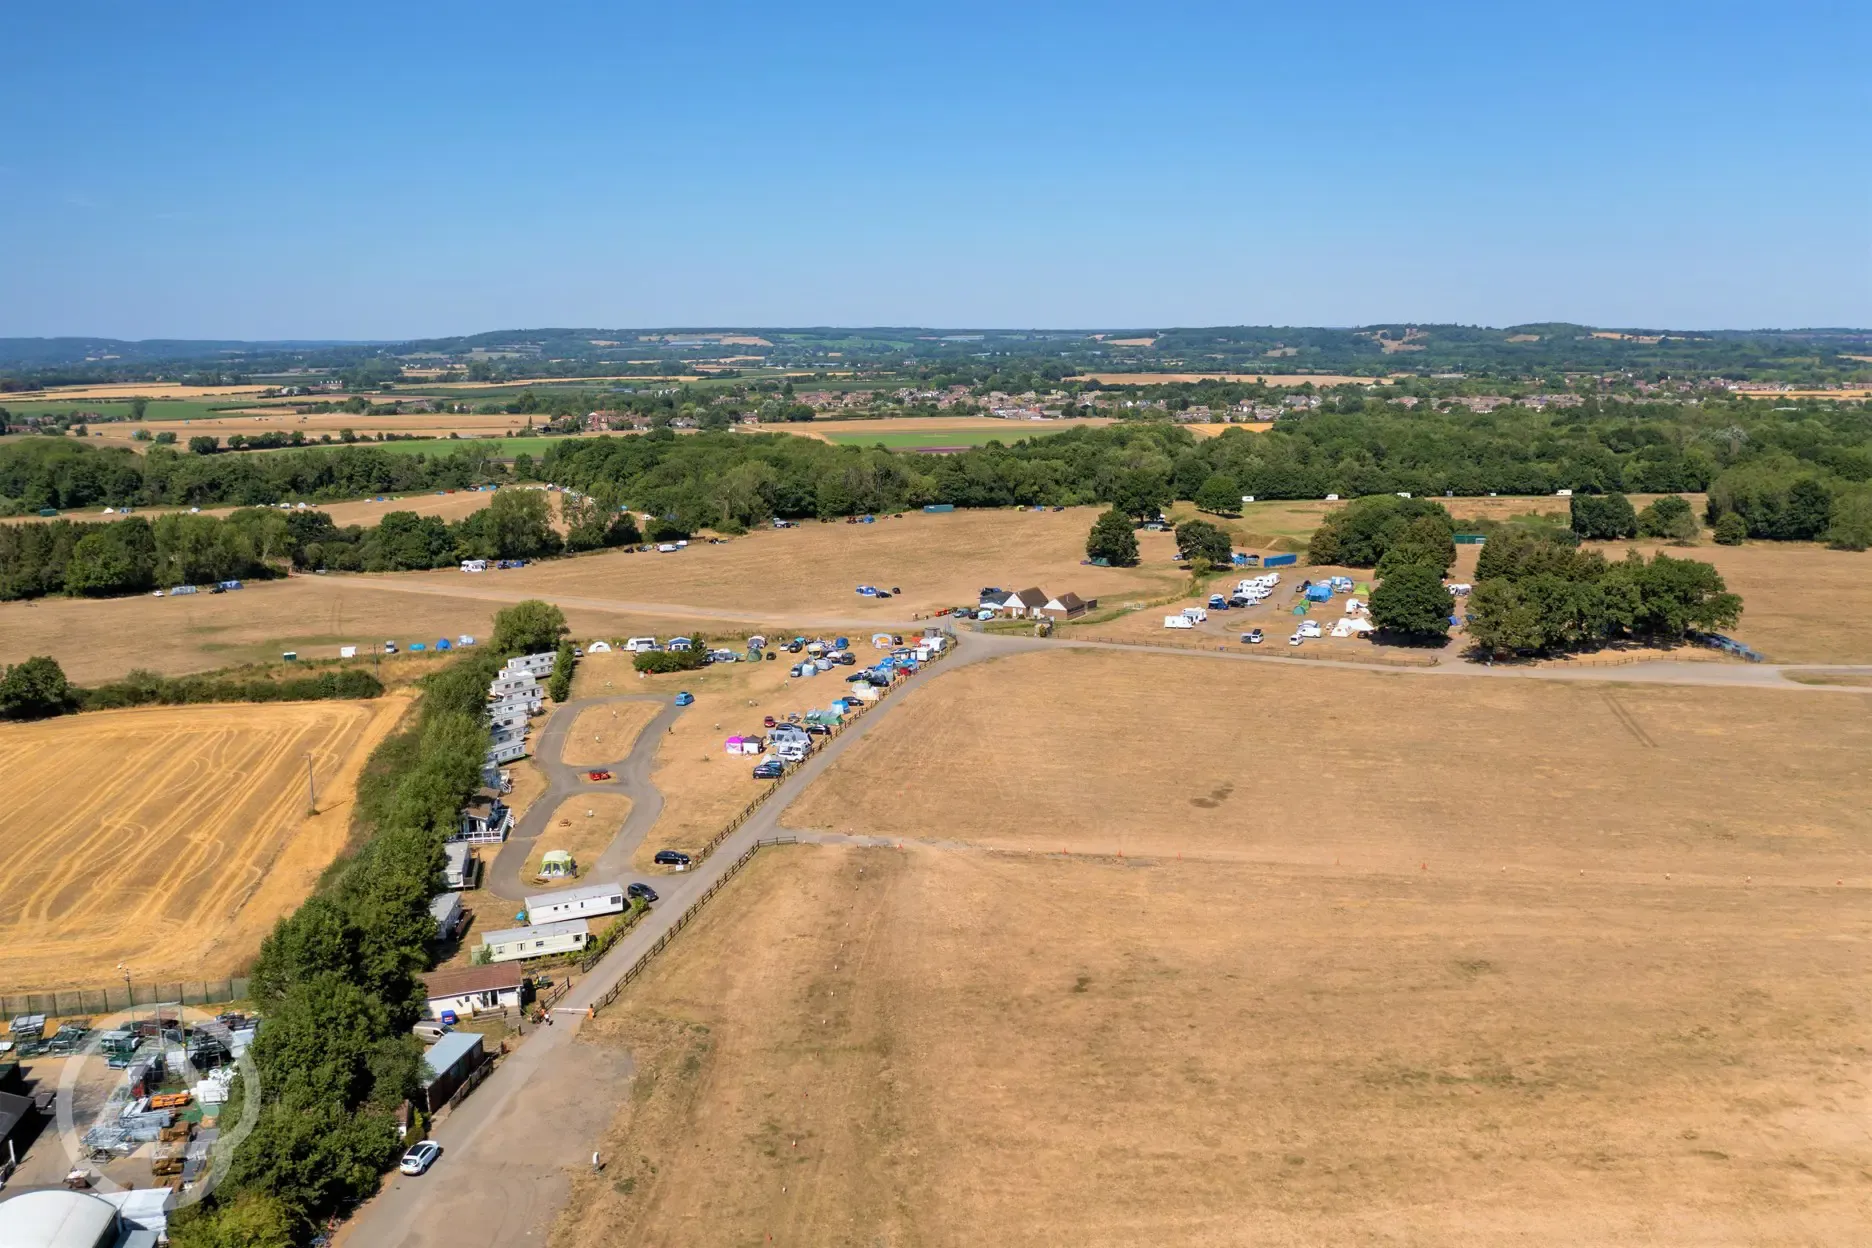 Aerial of the camping field